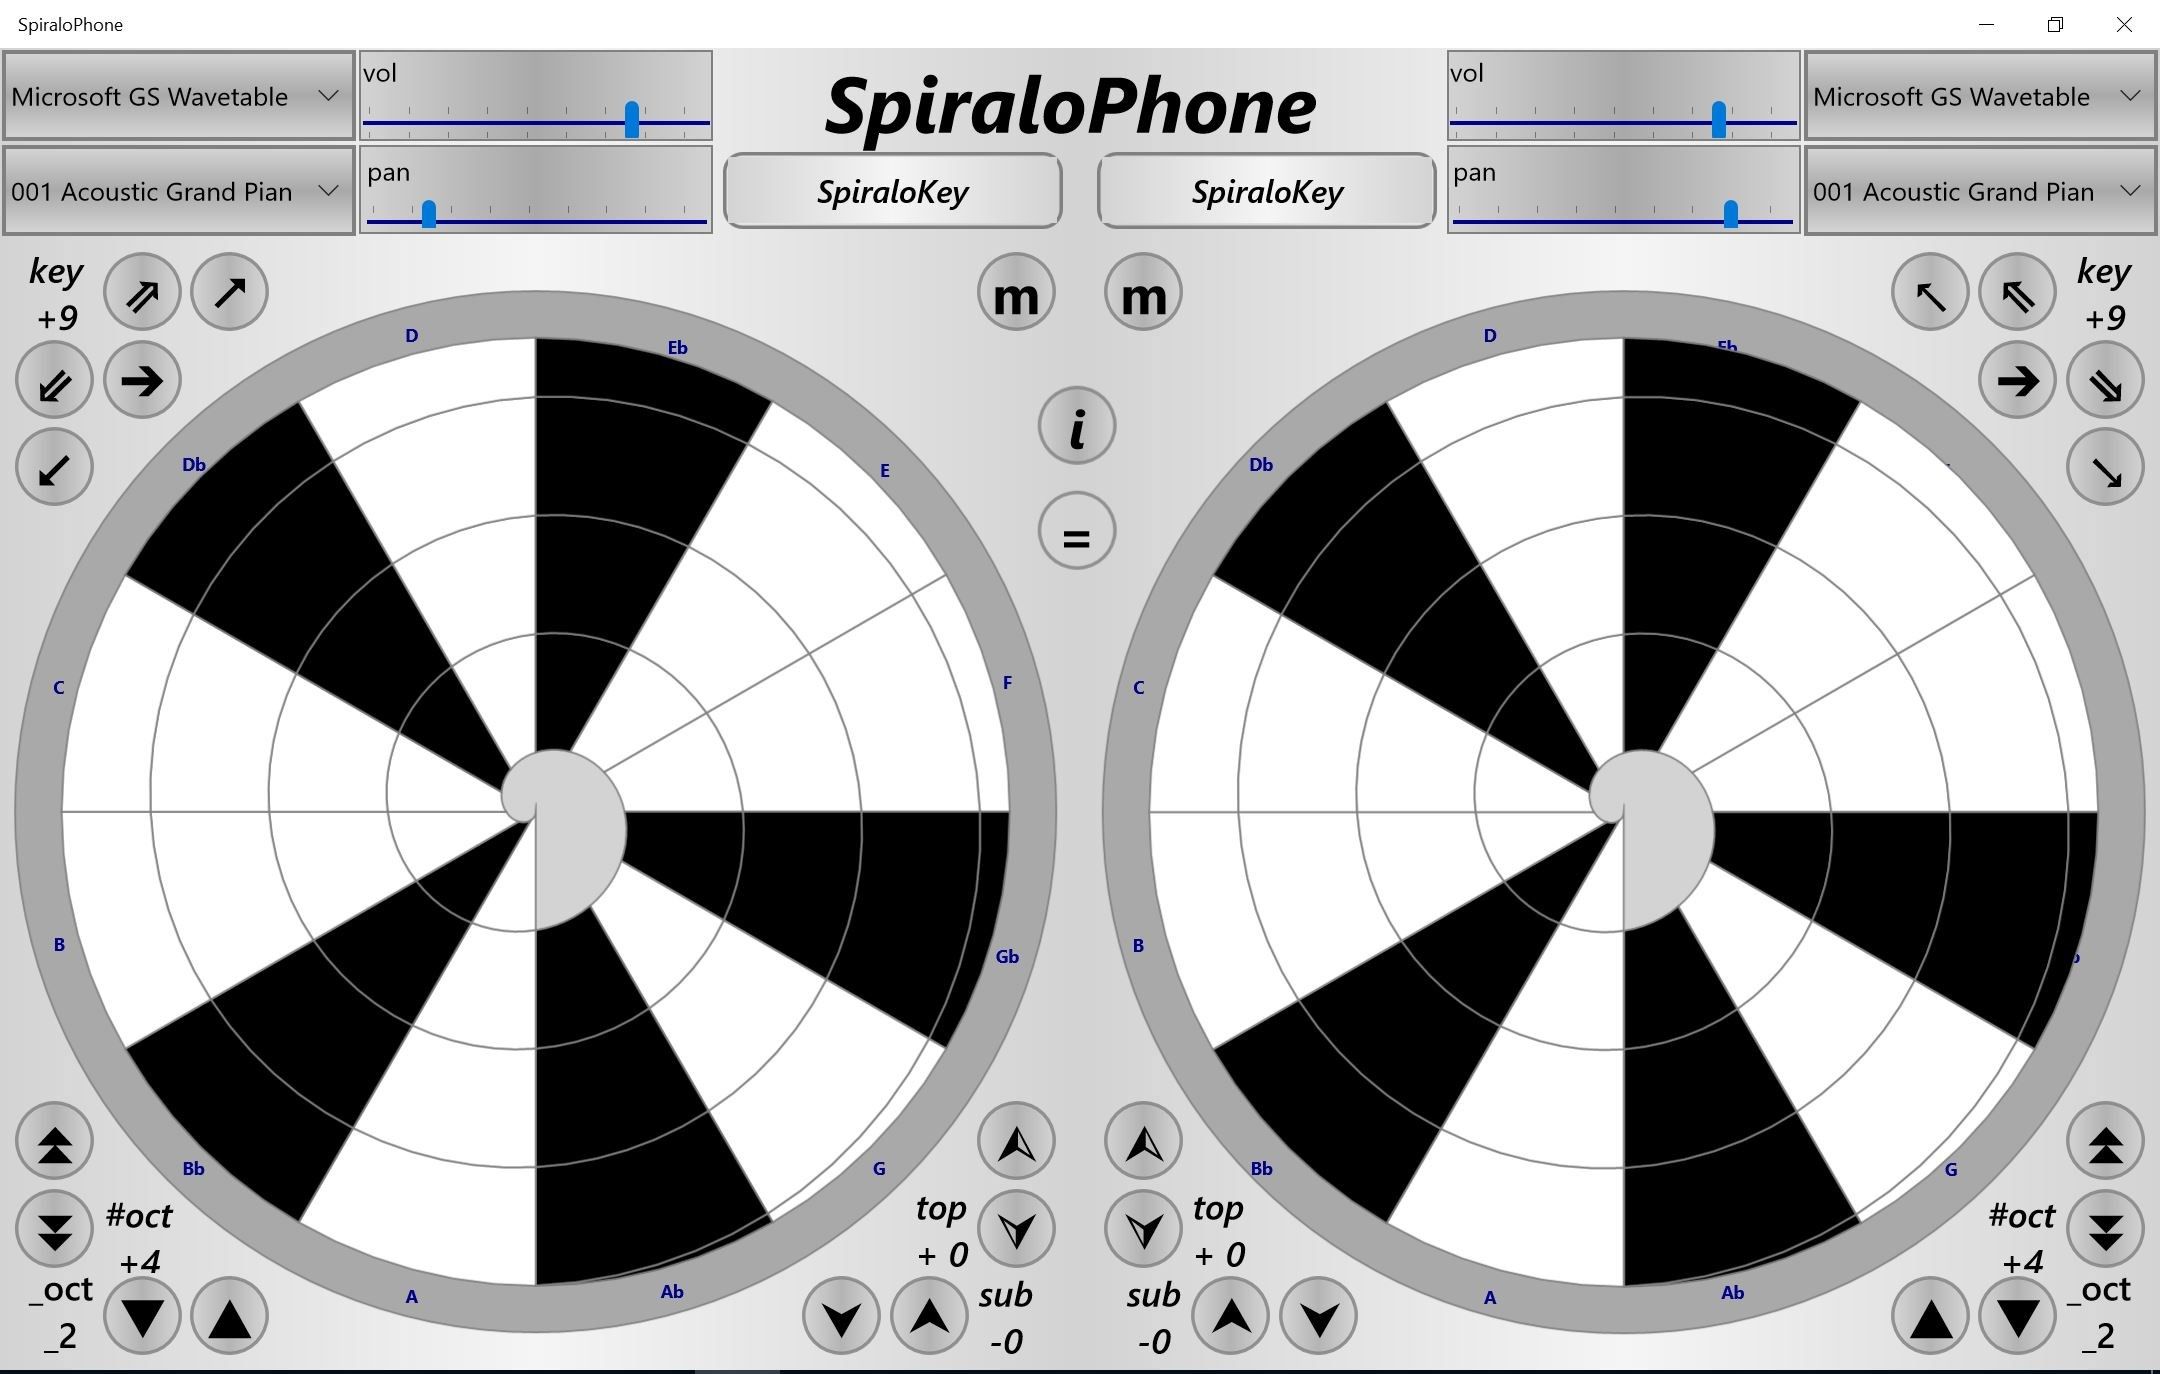 "SpiraloPhone" with two independent "SpiraloKey" music instruments,
where you can play on the spiral wrapped piano-keyboards.
You can control output device, sound, number of octaves, base octave, additional overtone and sub-tone octaves, spiral direction and rotation